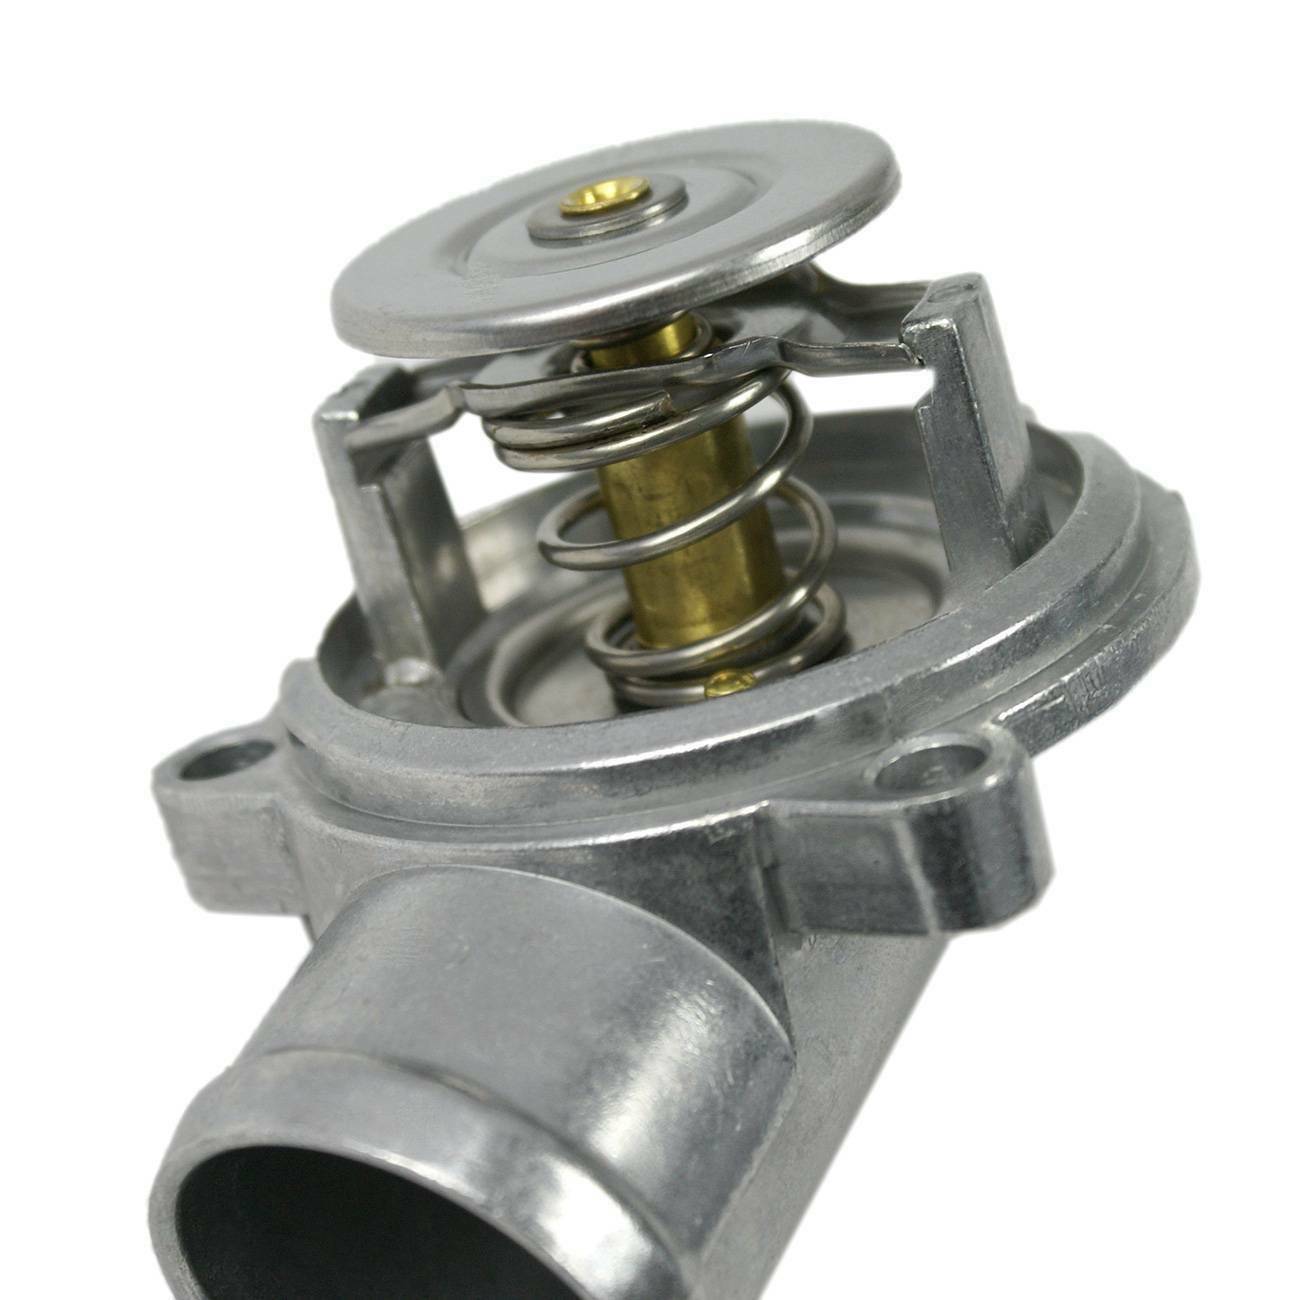 Thermostat W/ Seal for Mercedes A208 C208 W202 S202 W210 S210 A1112000315 German Made